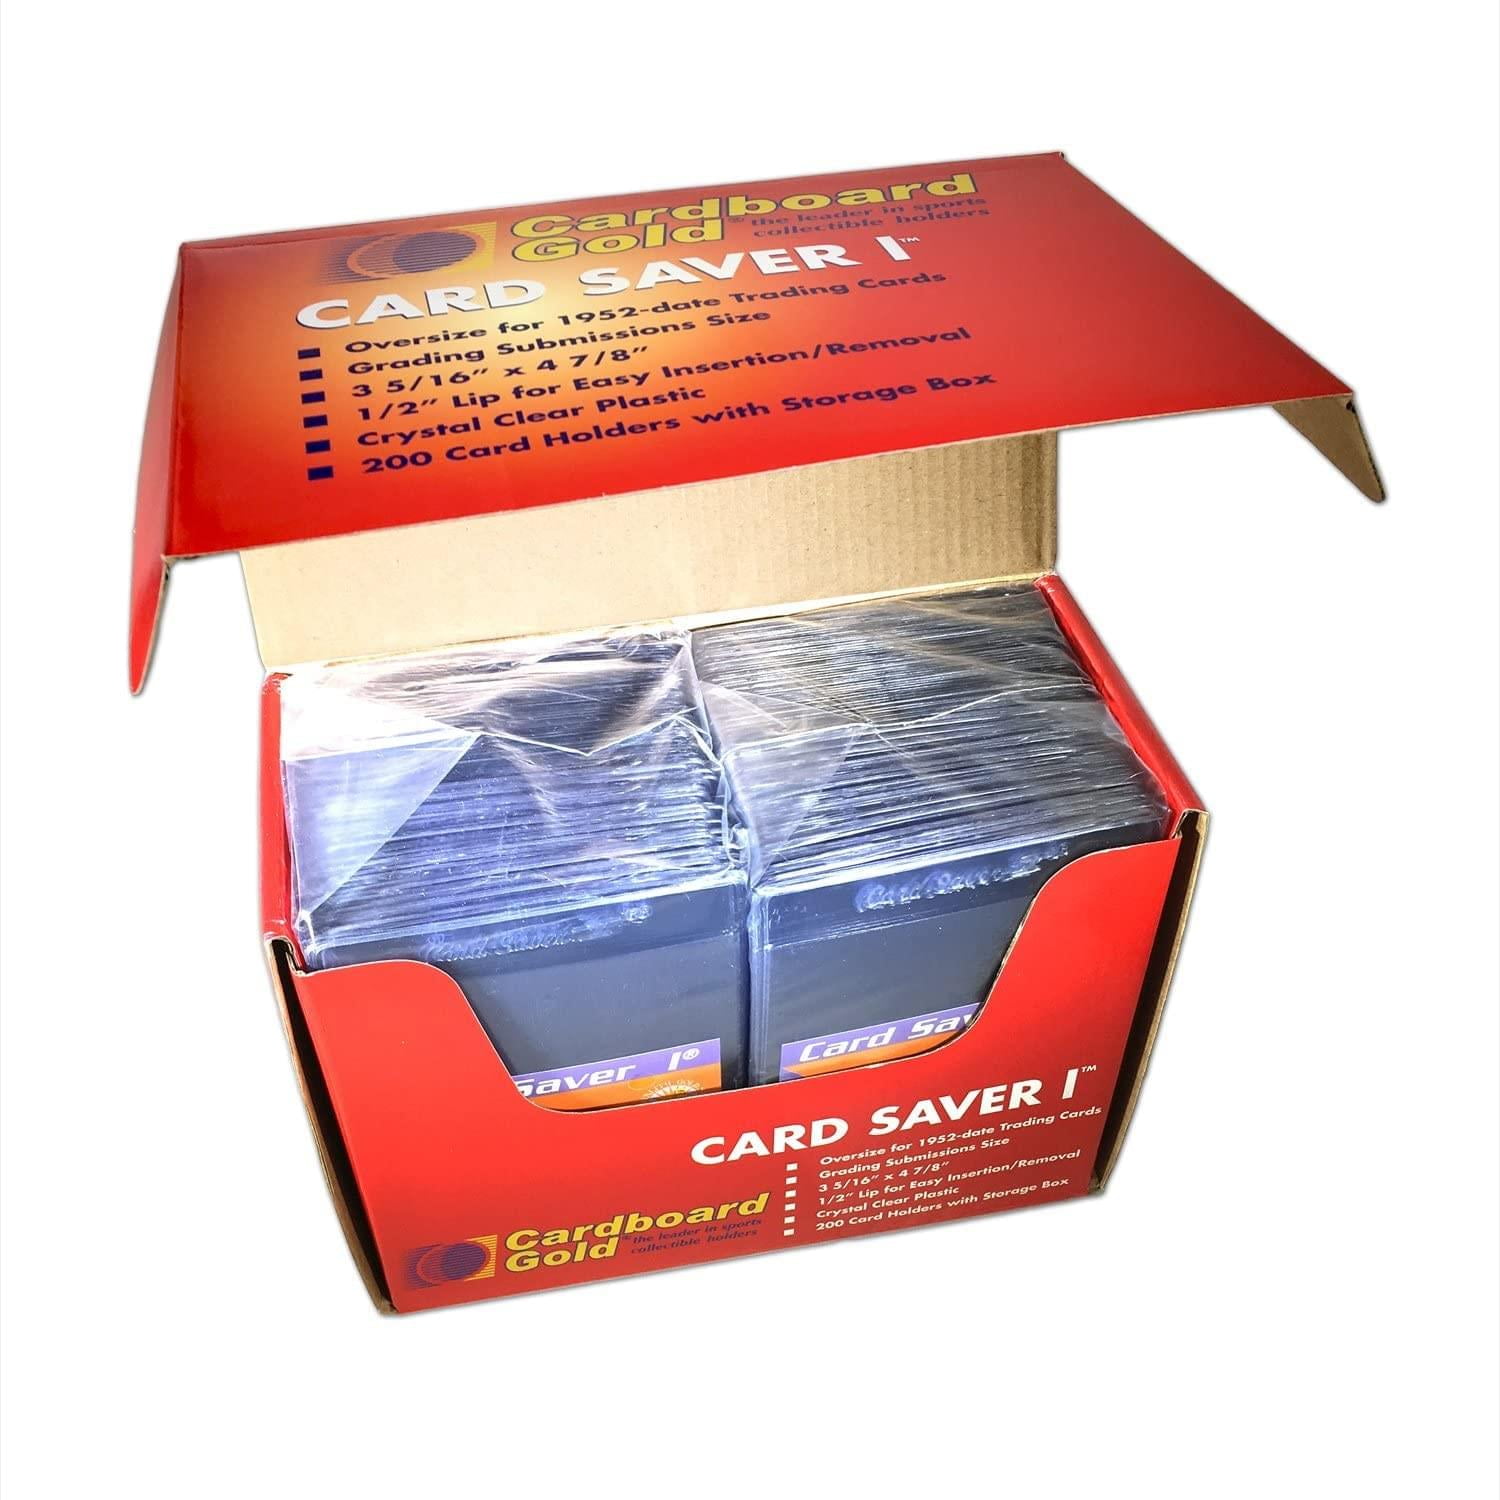 200 Card Saver 1 AND 200 SLEEVES Cardboard Gold 2-50 Ct Holders 100 Sleeves 